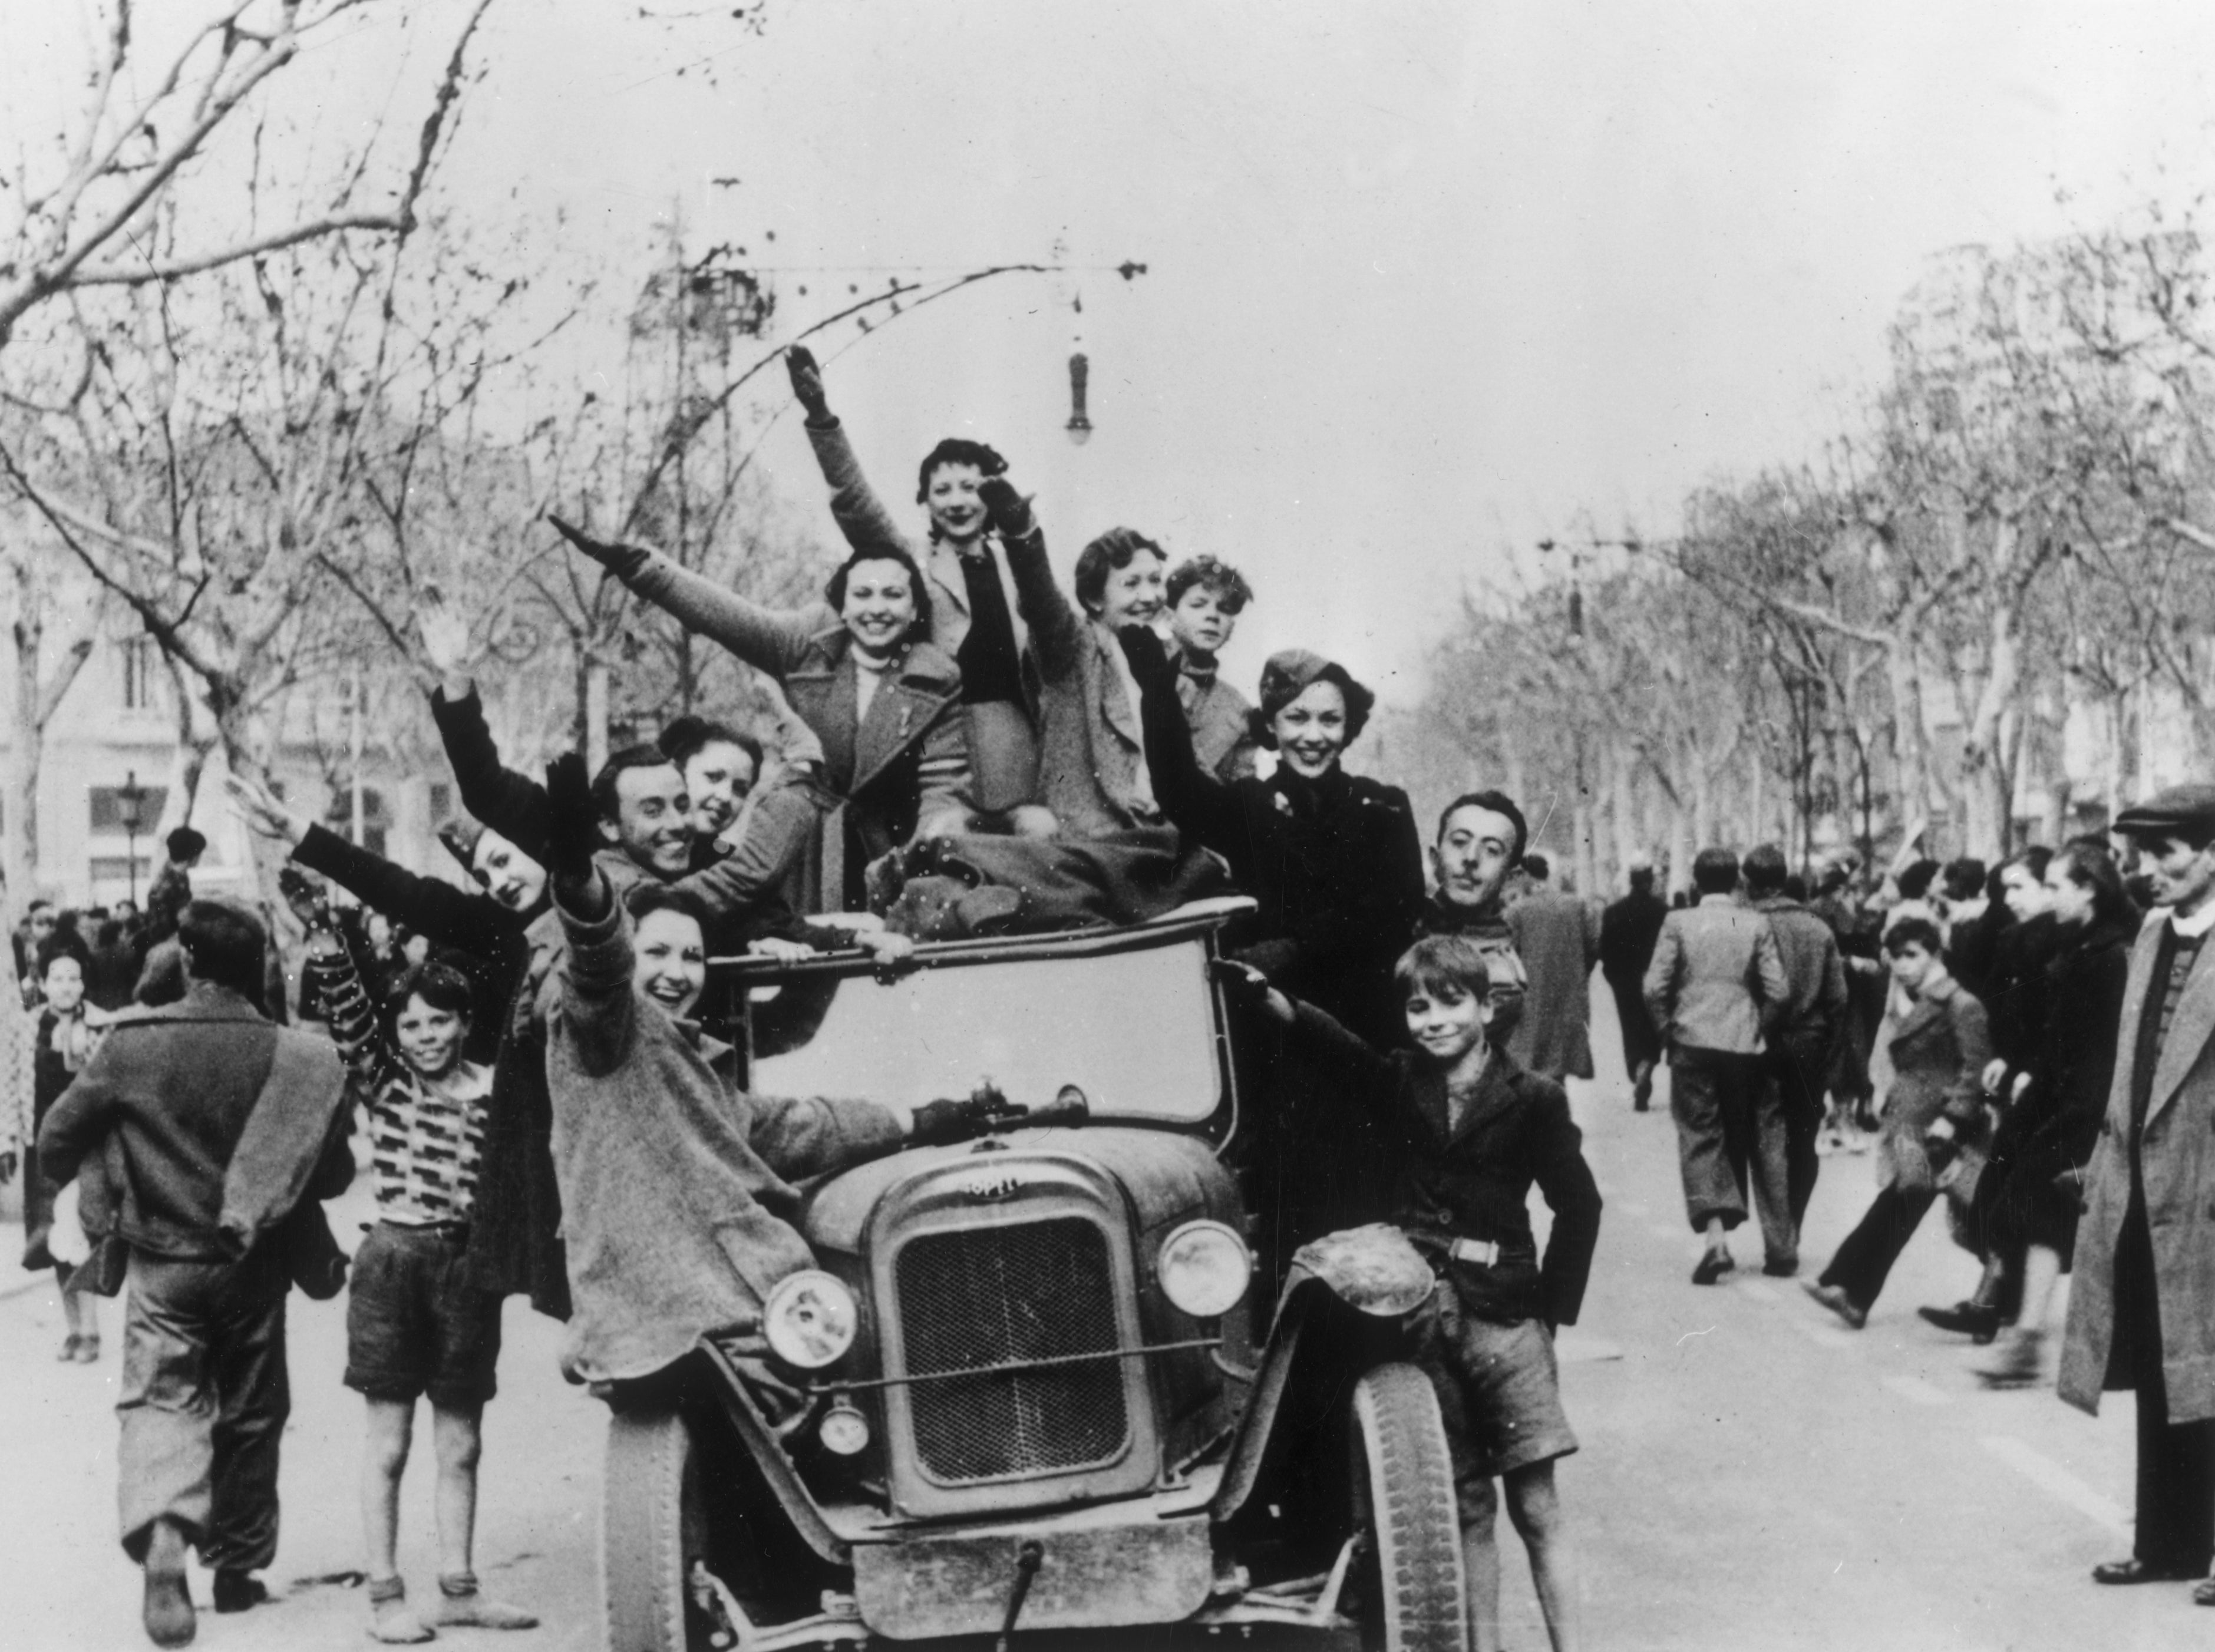 Spanish nationalists in Barcelona during the Spanish Civil War in 1939 – Spain may be poised to usher in a return of the hard right, almost half a century after the death of General Francisco Franco